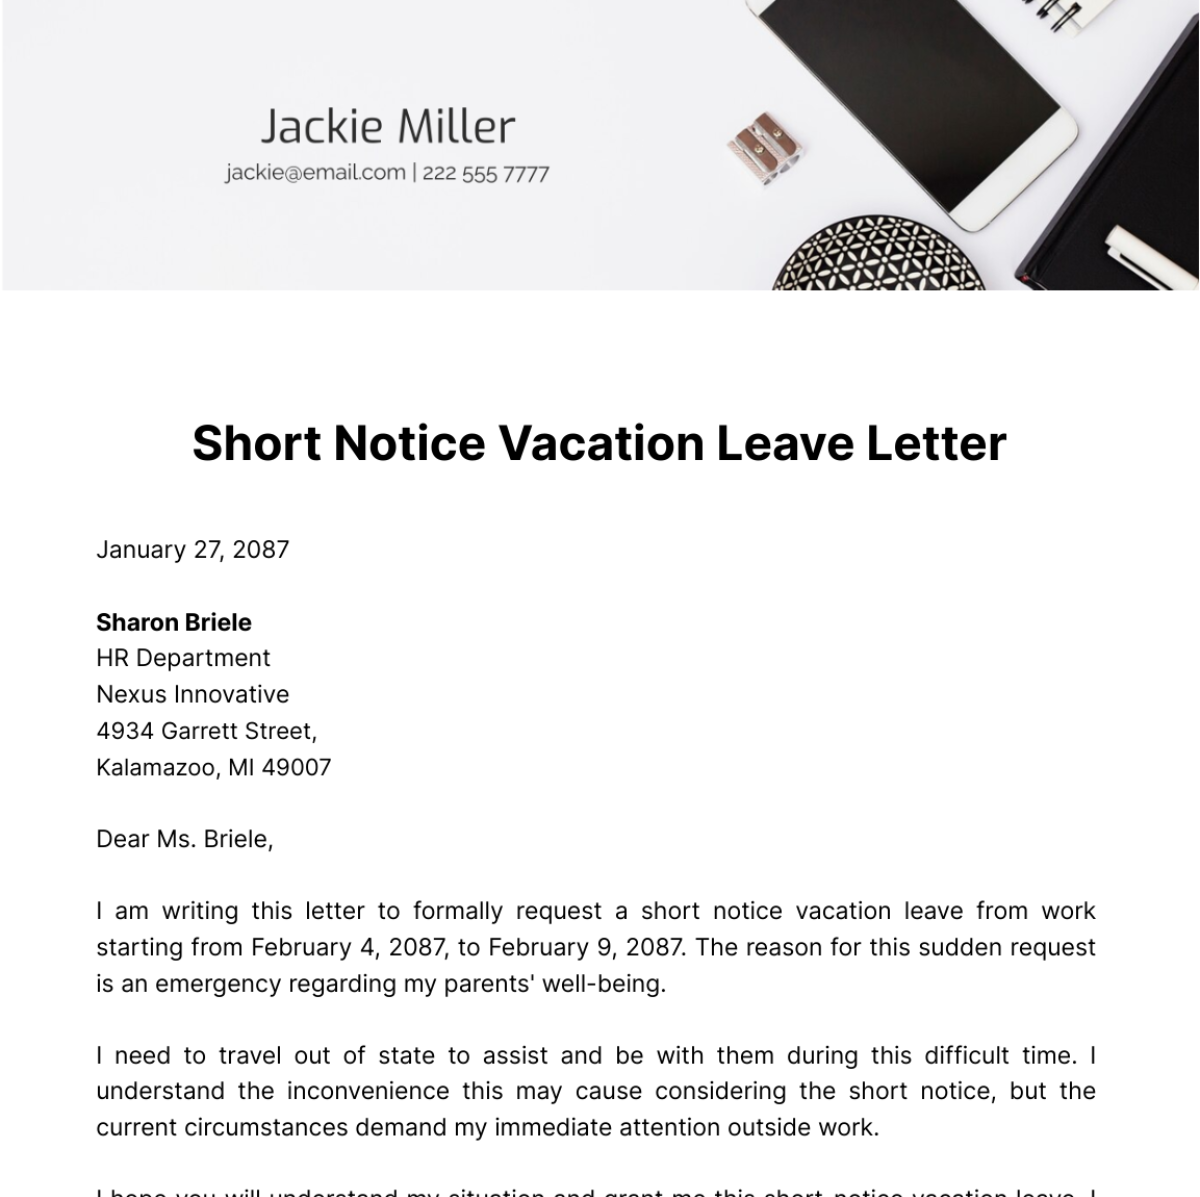 Short Notice Vacation Leave Letter Template